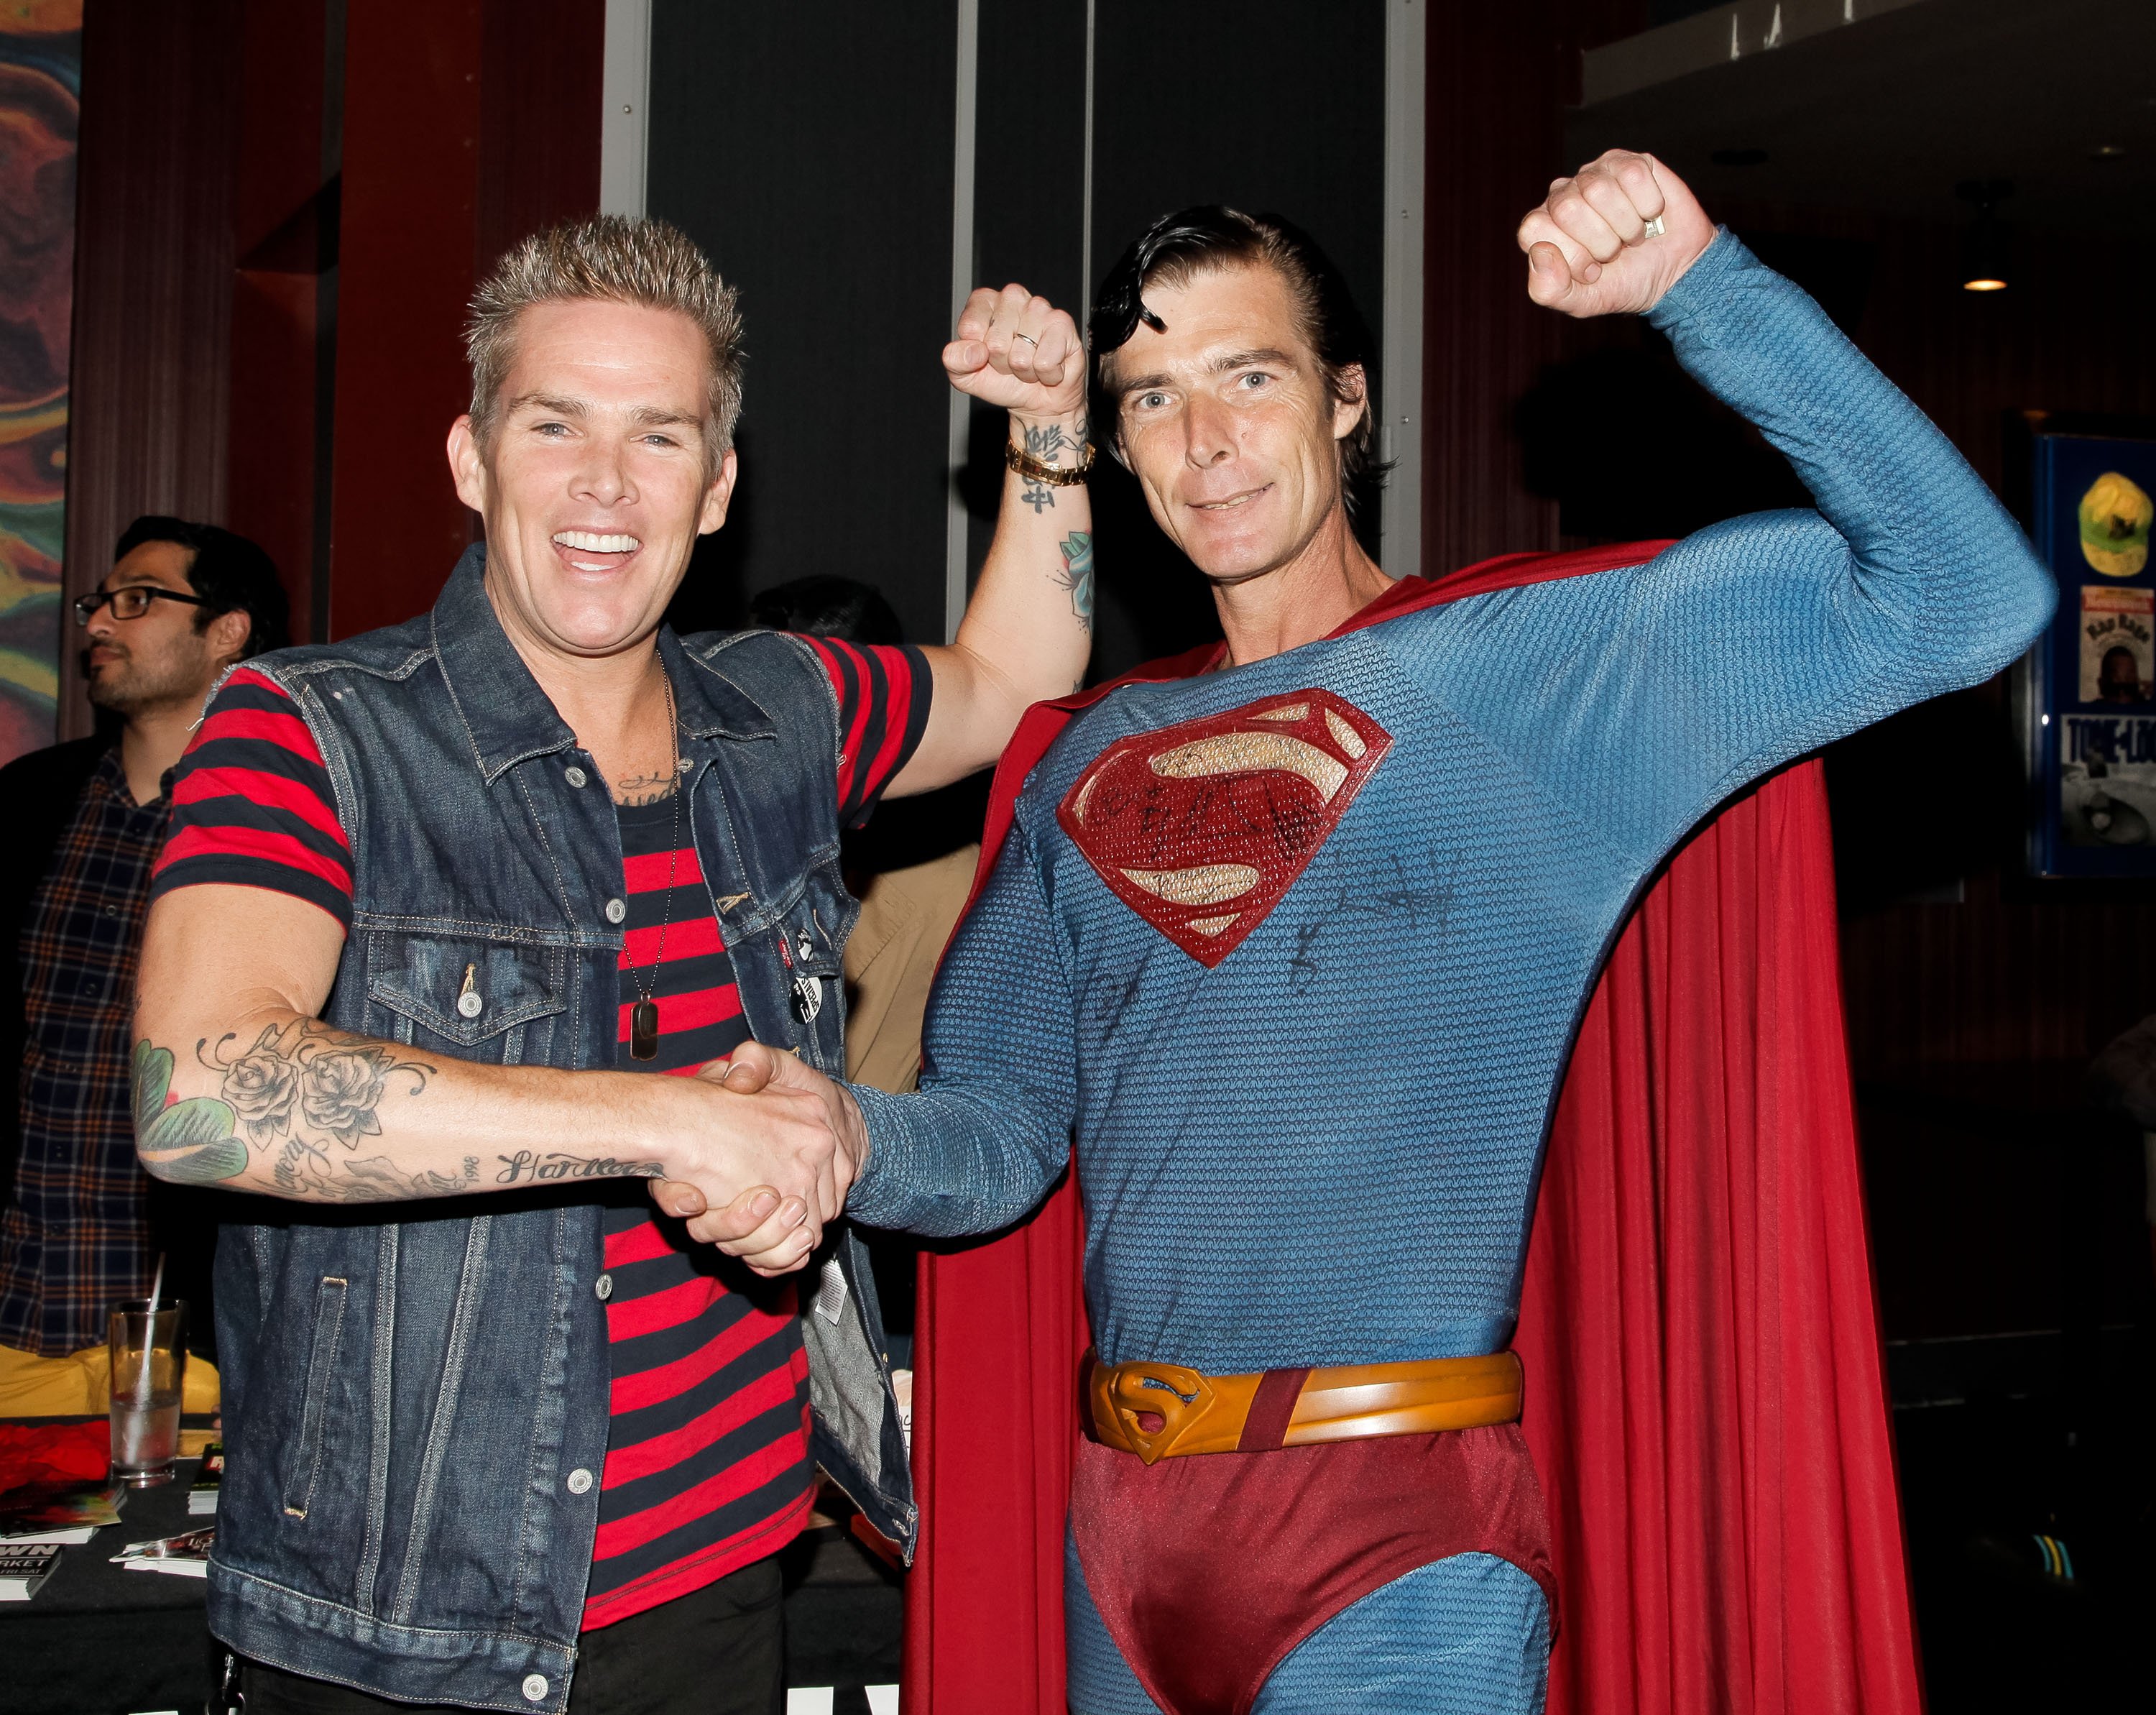 Christopher Dennis with musician Mark McGrath at "Sing For Your Supper" at Hard Rock Cafe in Hollywood, California | Photo: Tibrina Hobson/Getty Images